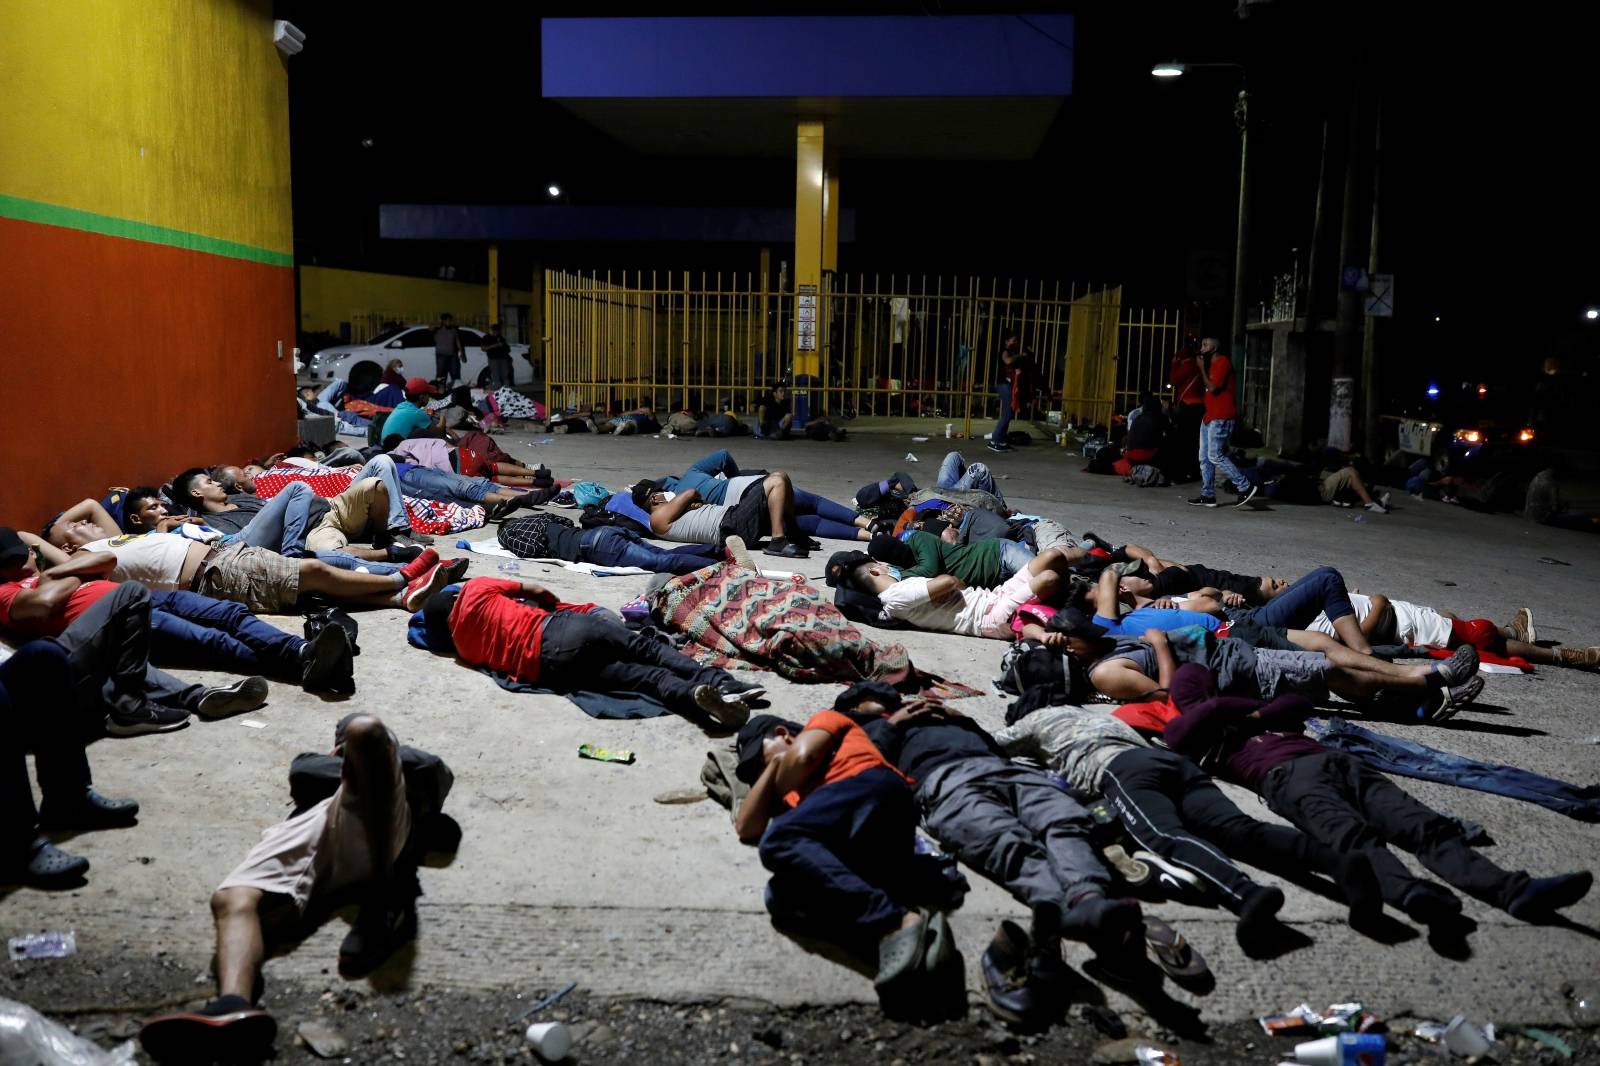 Honduran migrants trying to reach the U.S. sleep on the floor after a long day of walking in the town of Entre Rios